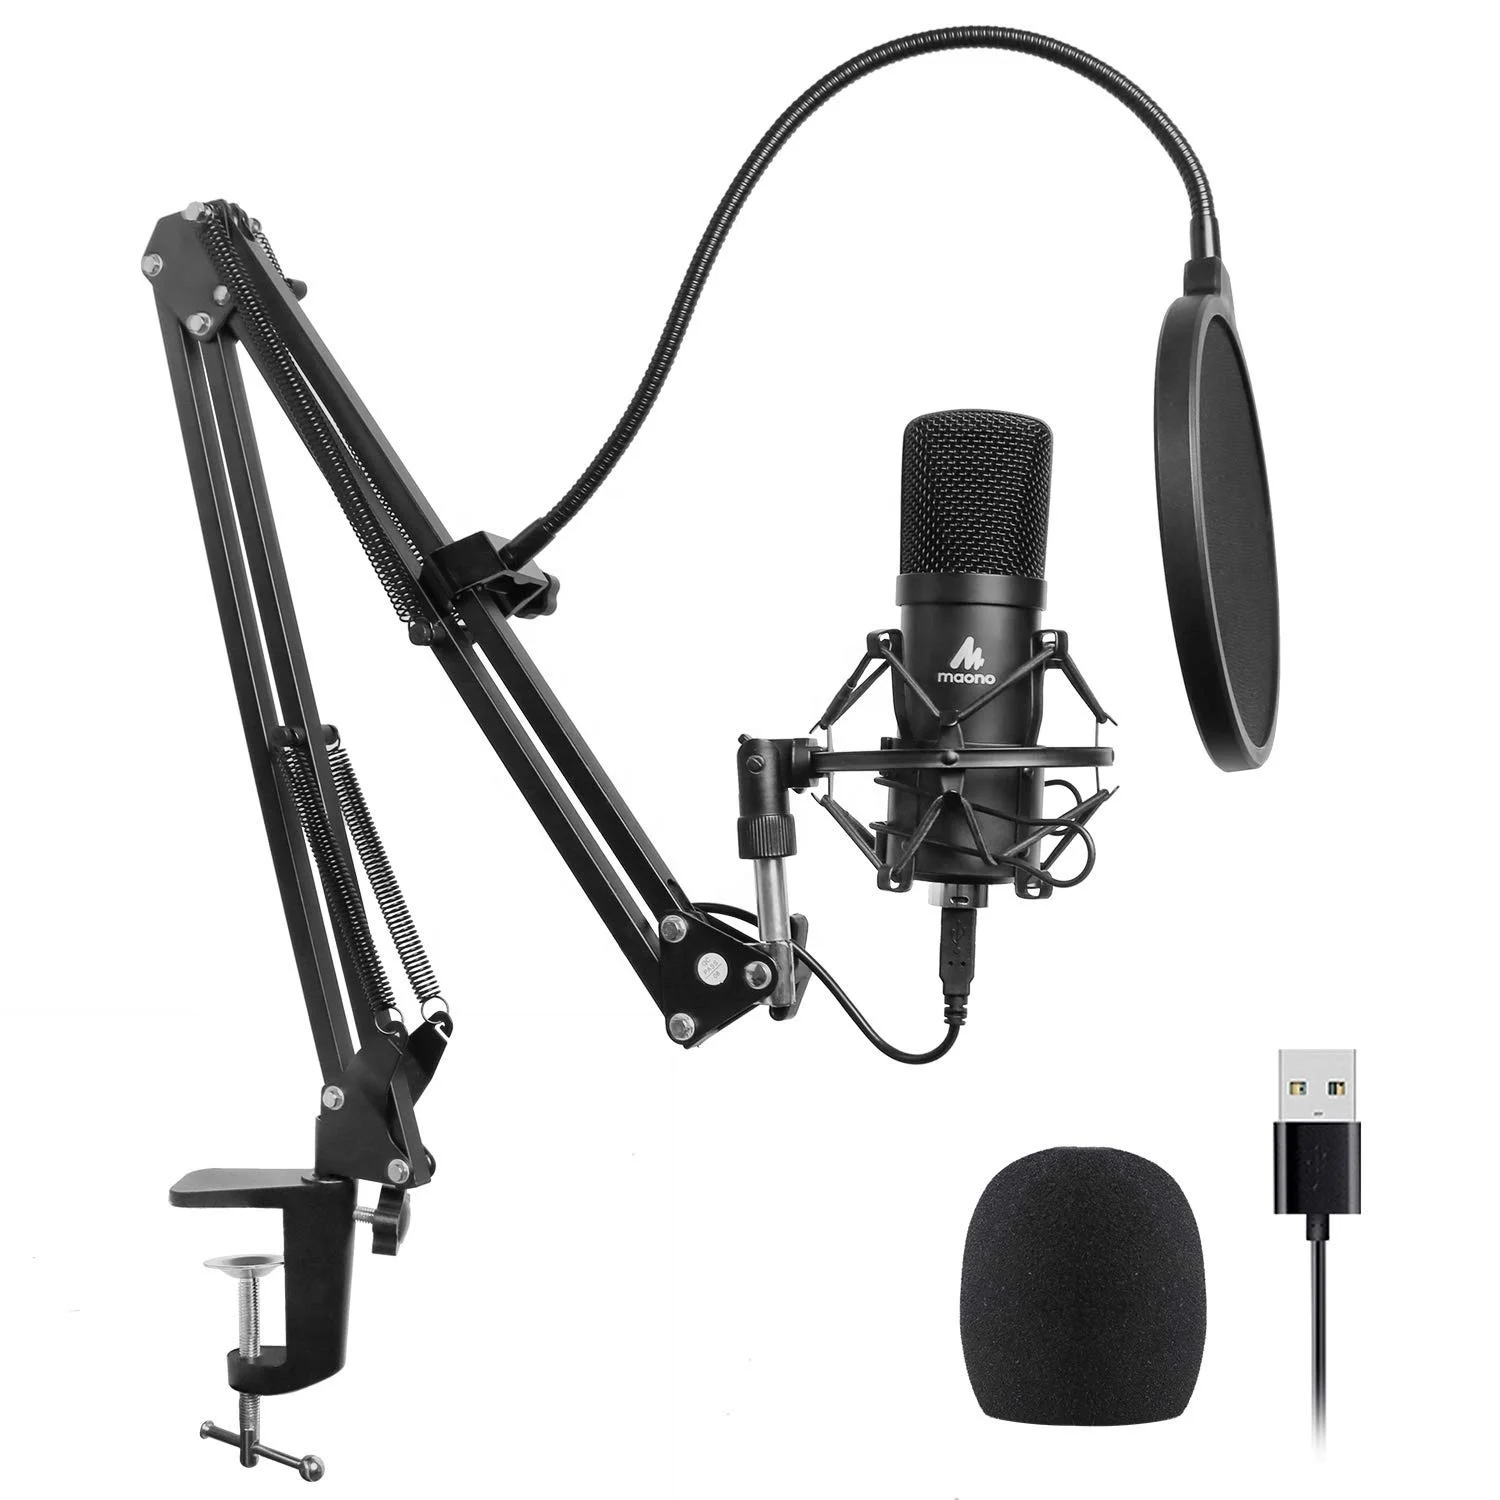 Professional wired podcasting gaming microphone recording microphone